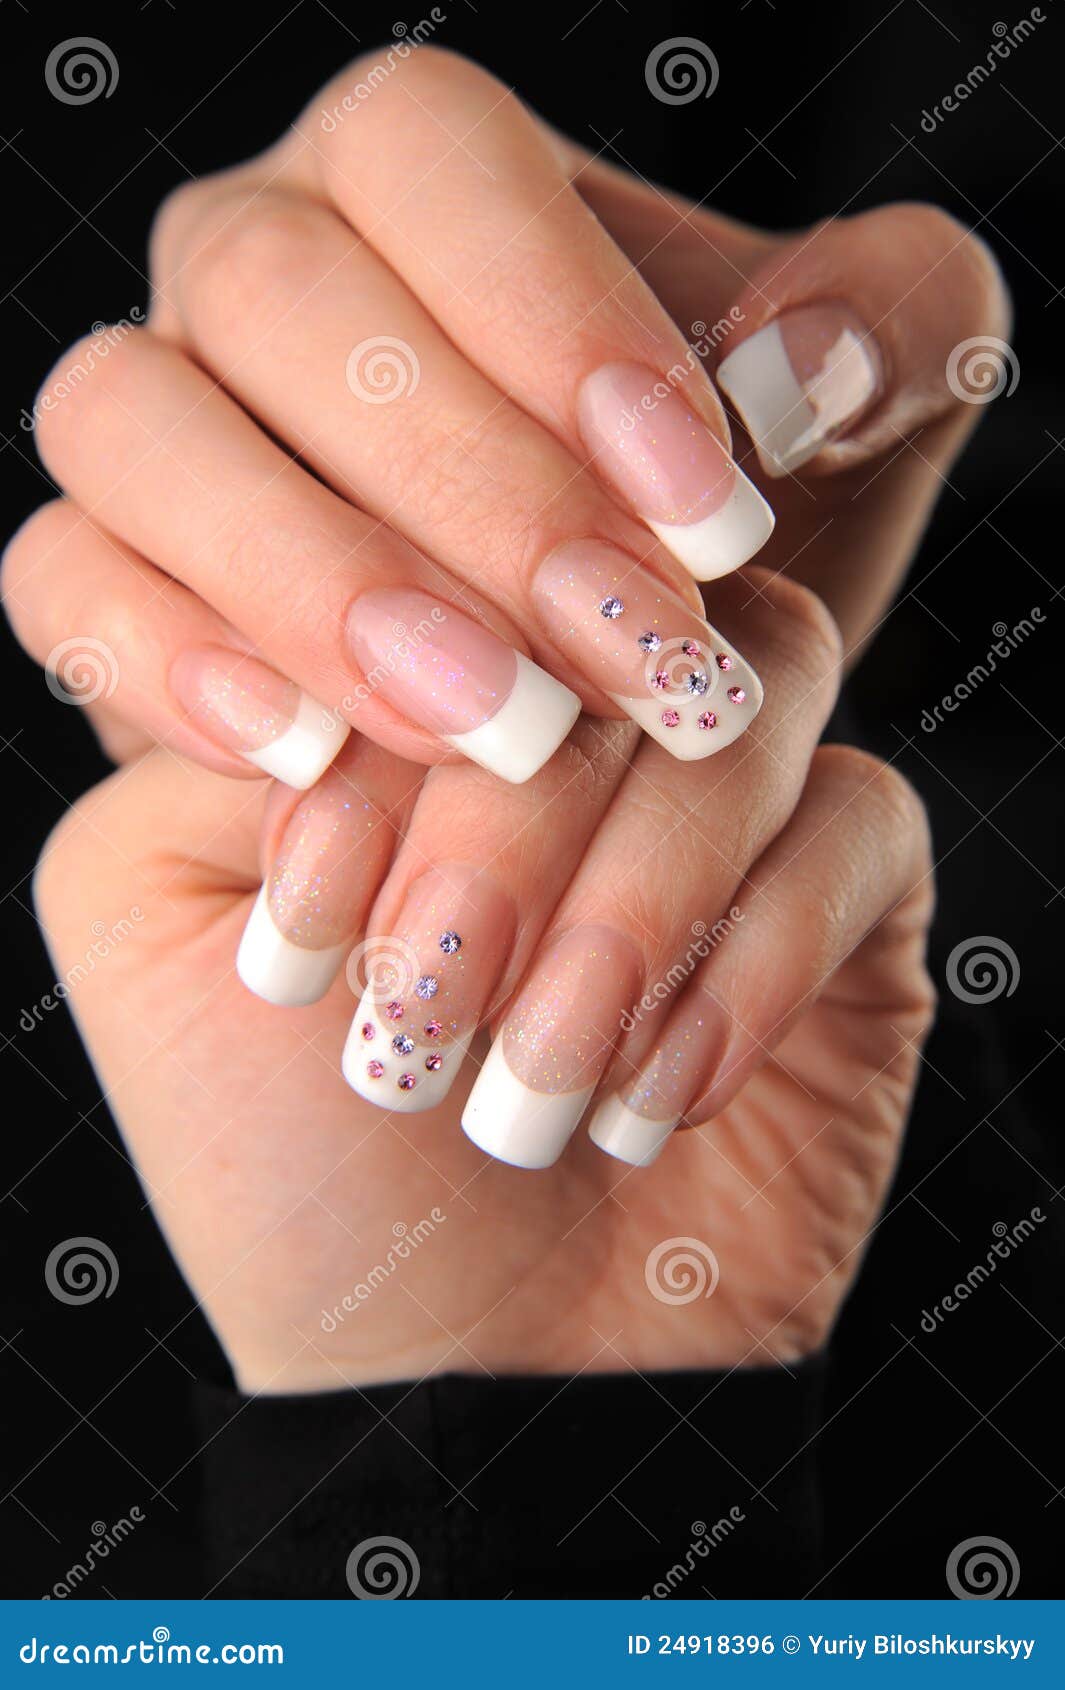 Manicures beautiful pattern on nails